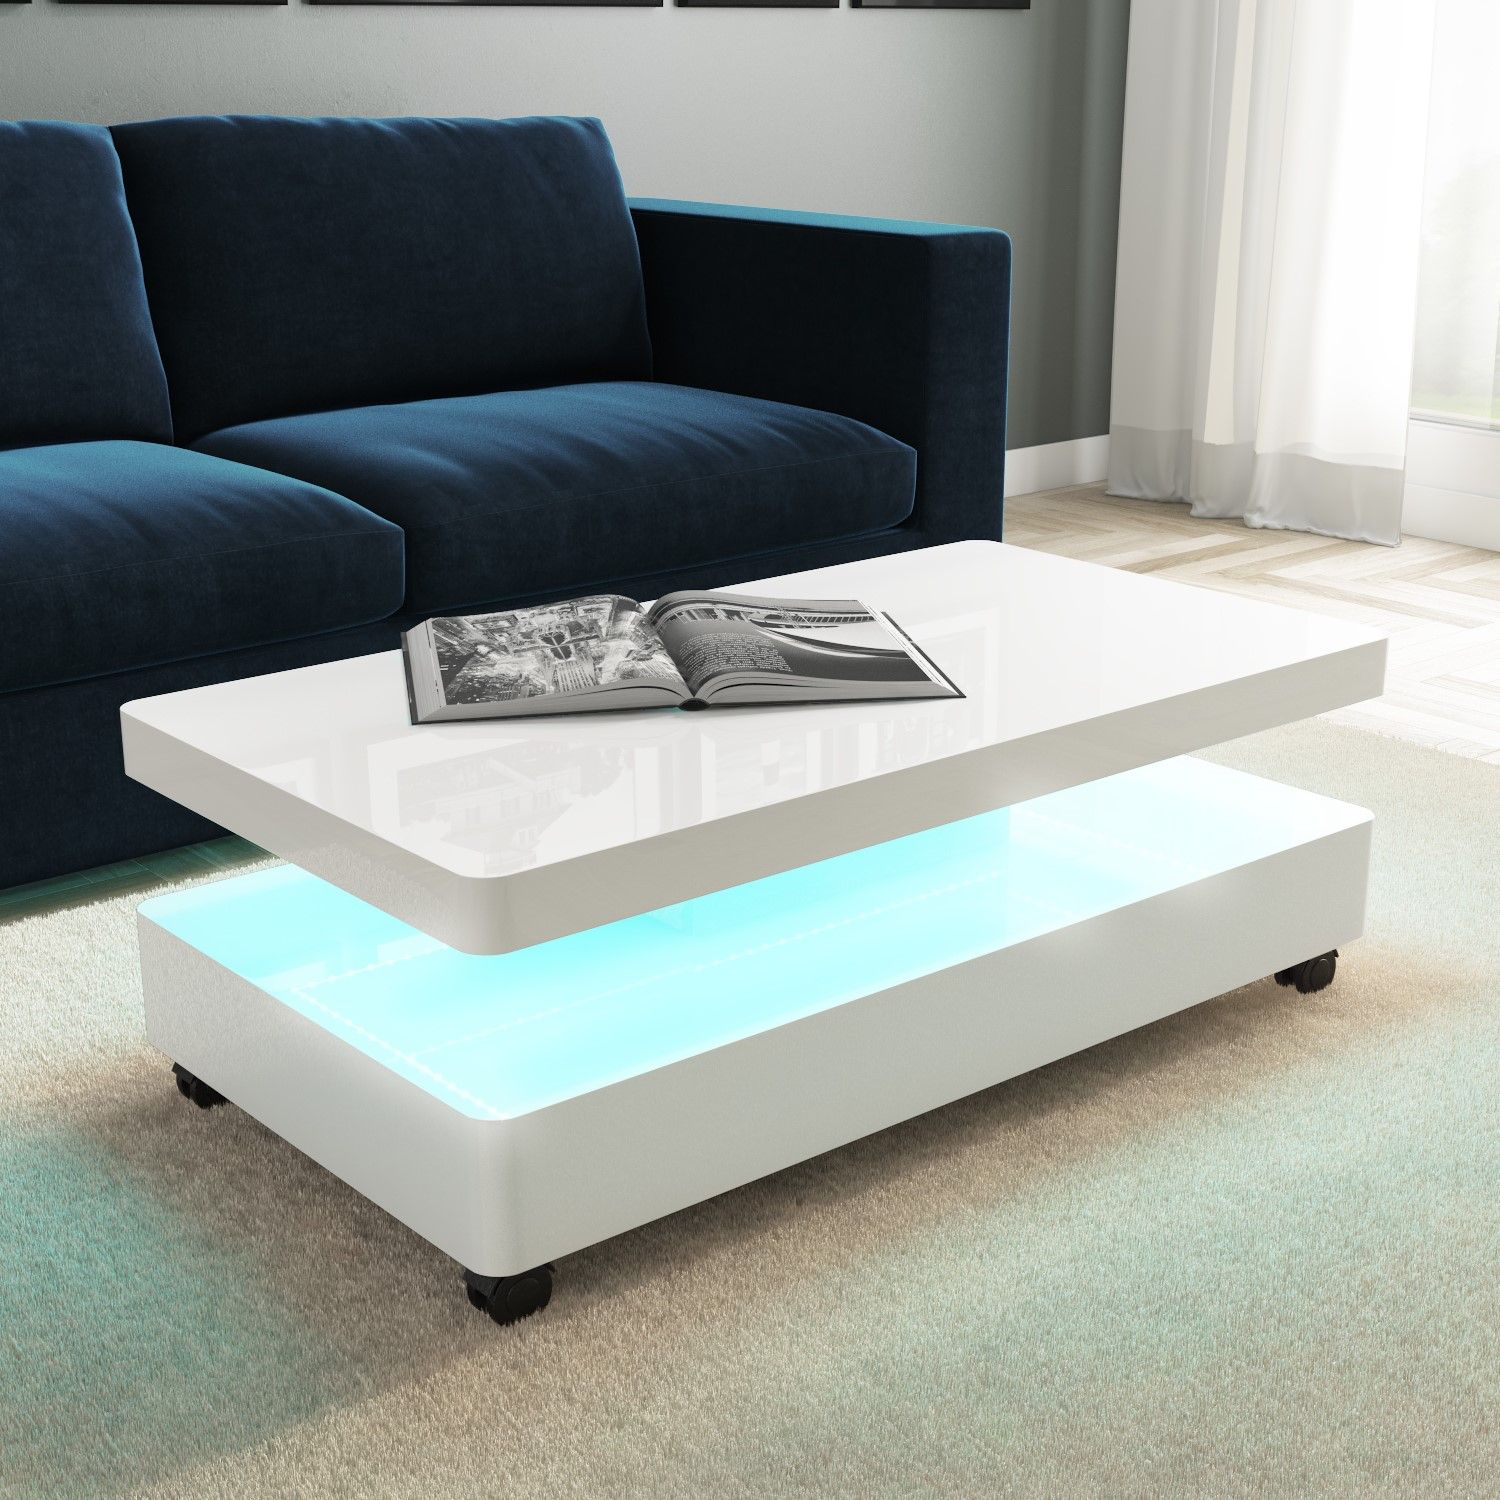 High Gloss White Coffee Table With Led Lighting 5060388562168 | Ebay Inside High Gloss Lift Top Coffee Tables (View 19 of 21)